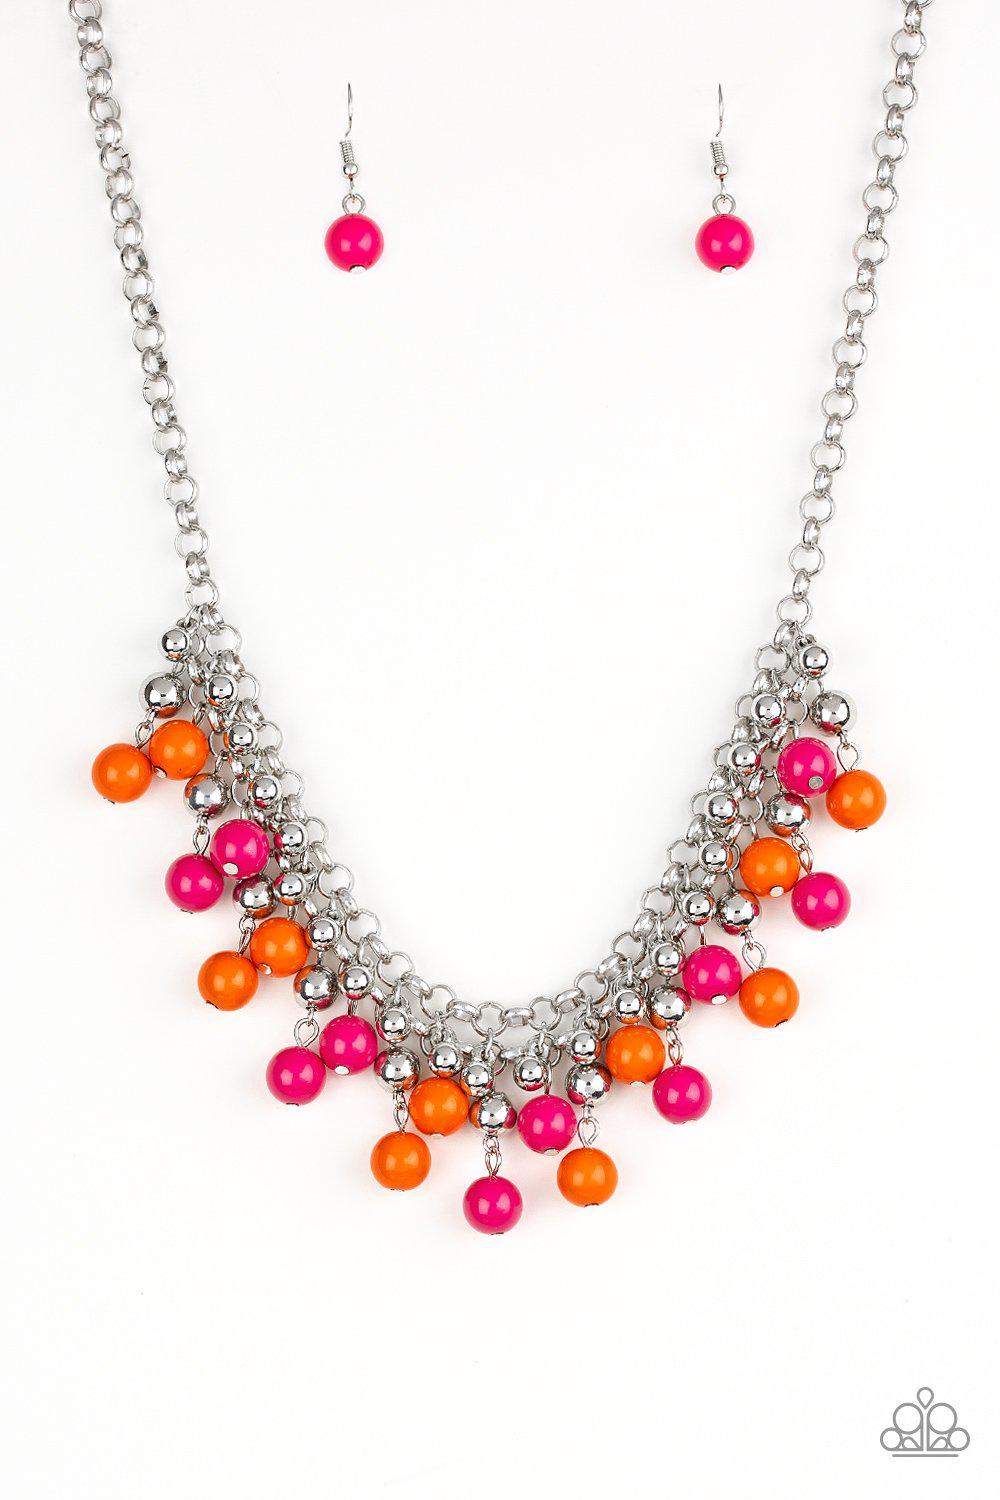 Friday Night Fringe Multi - Pink and Orange Necklace - Paparazzi Accessories - lightbox -CarasShop.com - $5 Jewelry by Cara Jewels